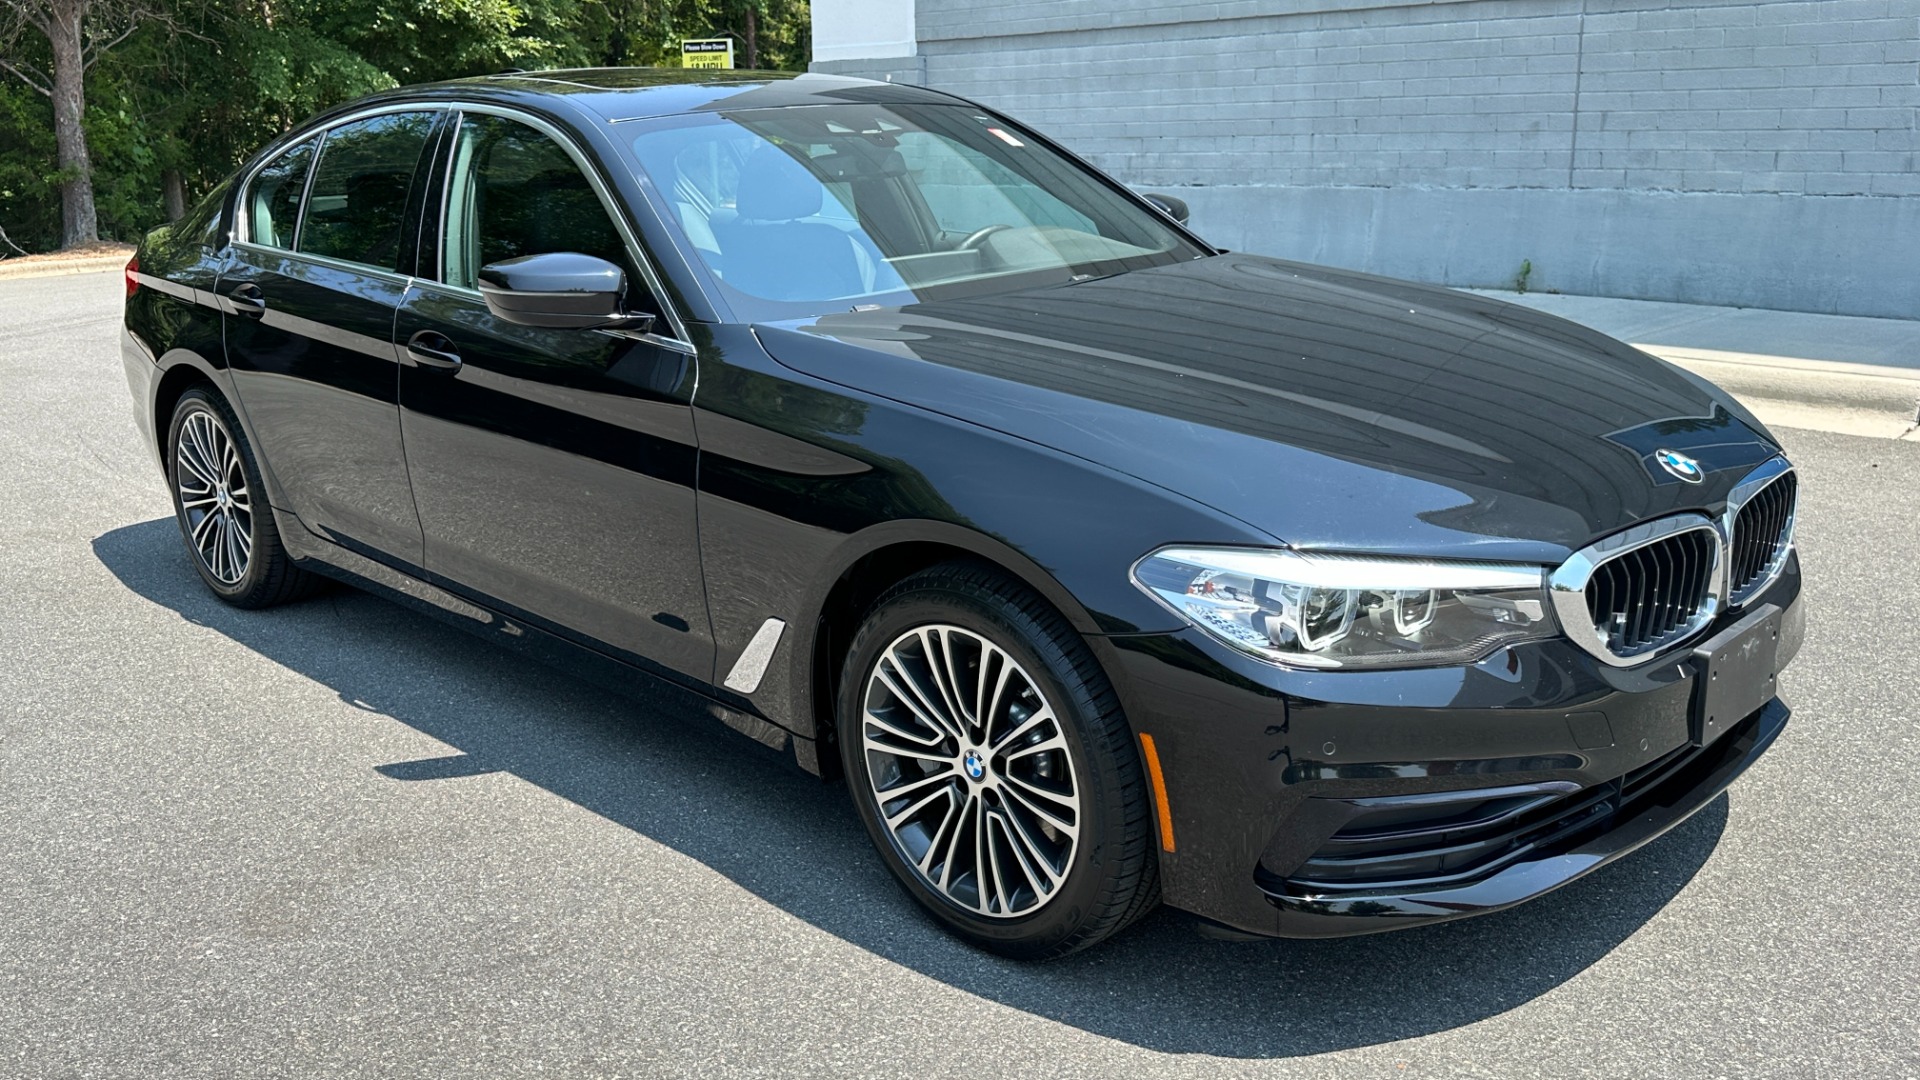 Used 2019 BMW 5 Series 530i xDrive / HEATED SEATS / NAV / SUNROOF / REARVIEW CAMERA for sale $30,795 at Formula Imports in Charlotte NC 28227 2